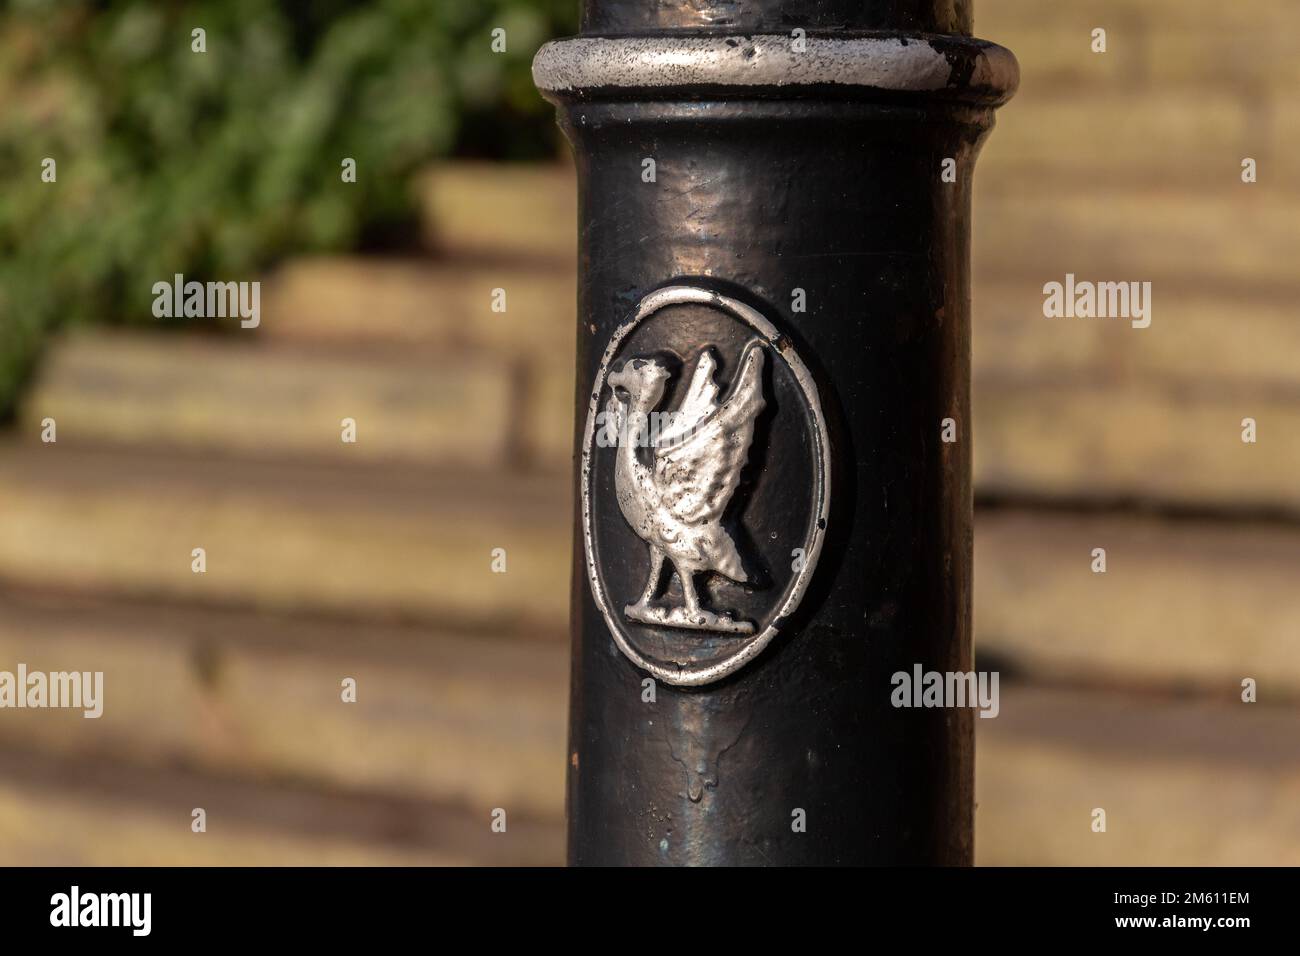 Liverpool, UK:  Traffic bollard with Liver bird logo, outside entrance steps to Saint James Mount Gardens and Anglican Cathedral Stock Photo